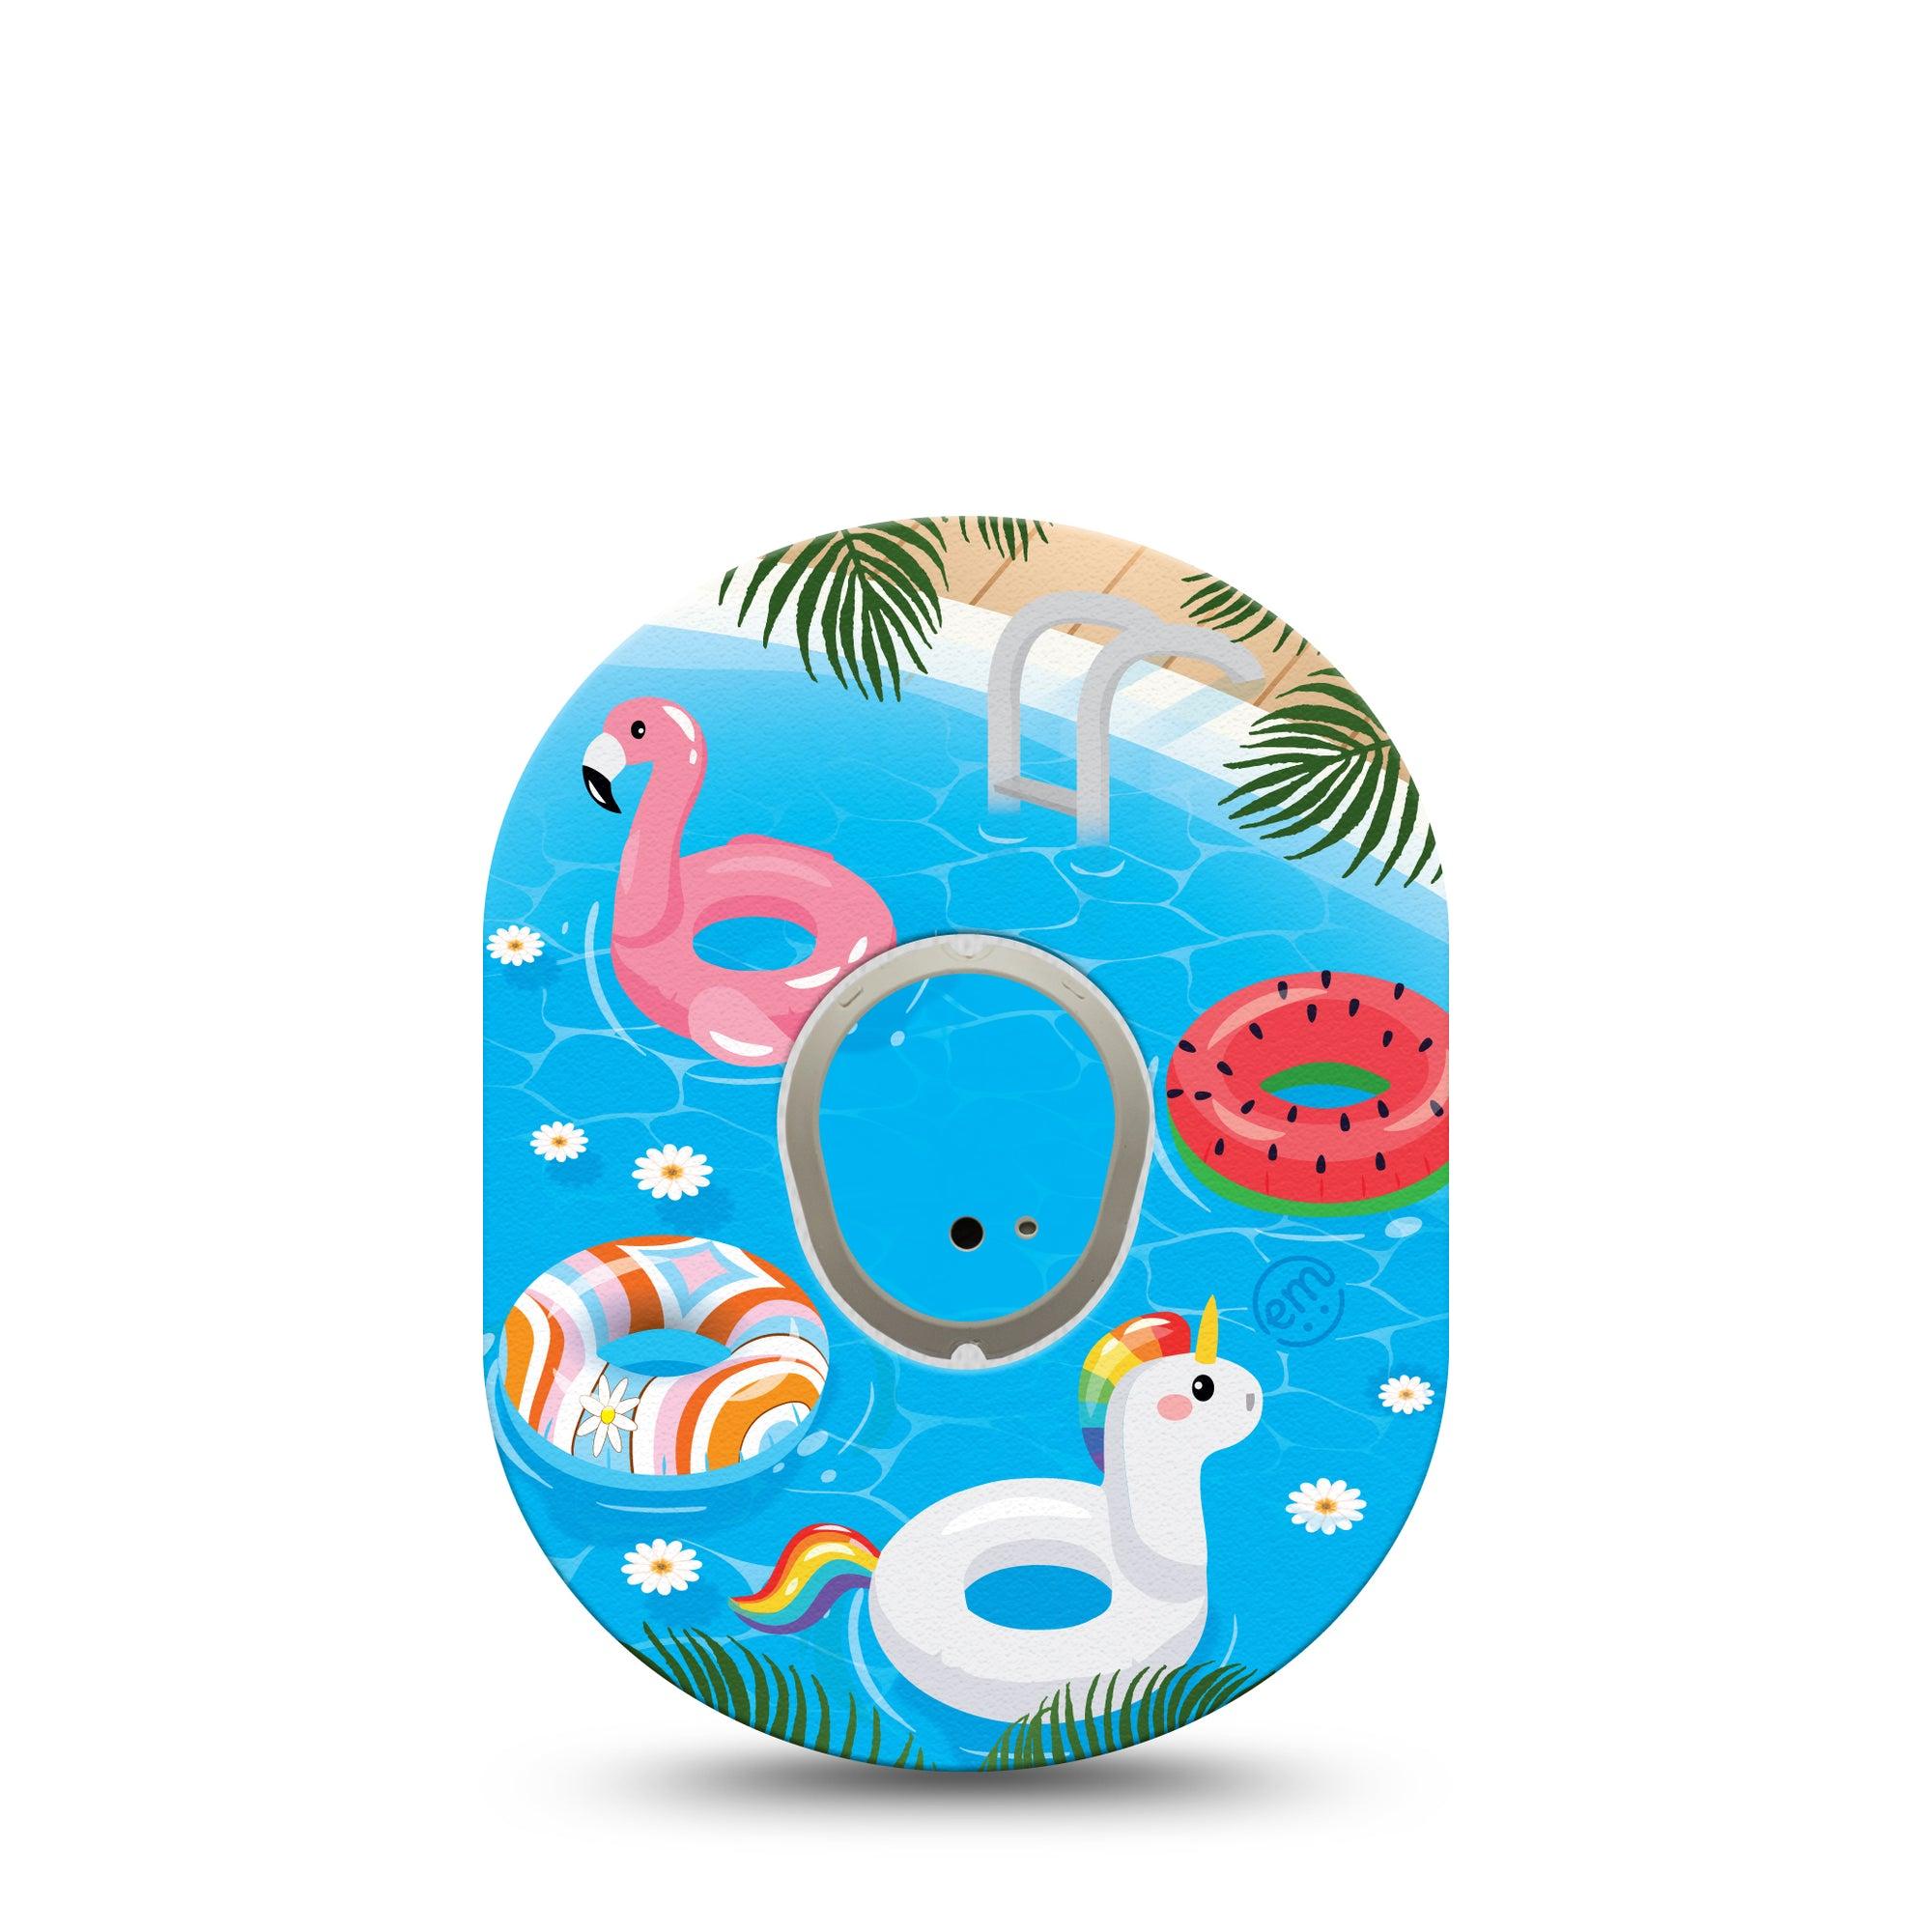 ExpressionMed Summer Pool Dexcom G7 Transmitter Sticker, Single, Kids Swimming Floaters Themed, Dexcom G7 Transmitter Vinyl Sticker, With Matching Dexcom G7 Tape, CGM Plaster Patch Design